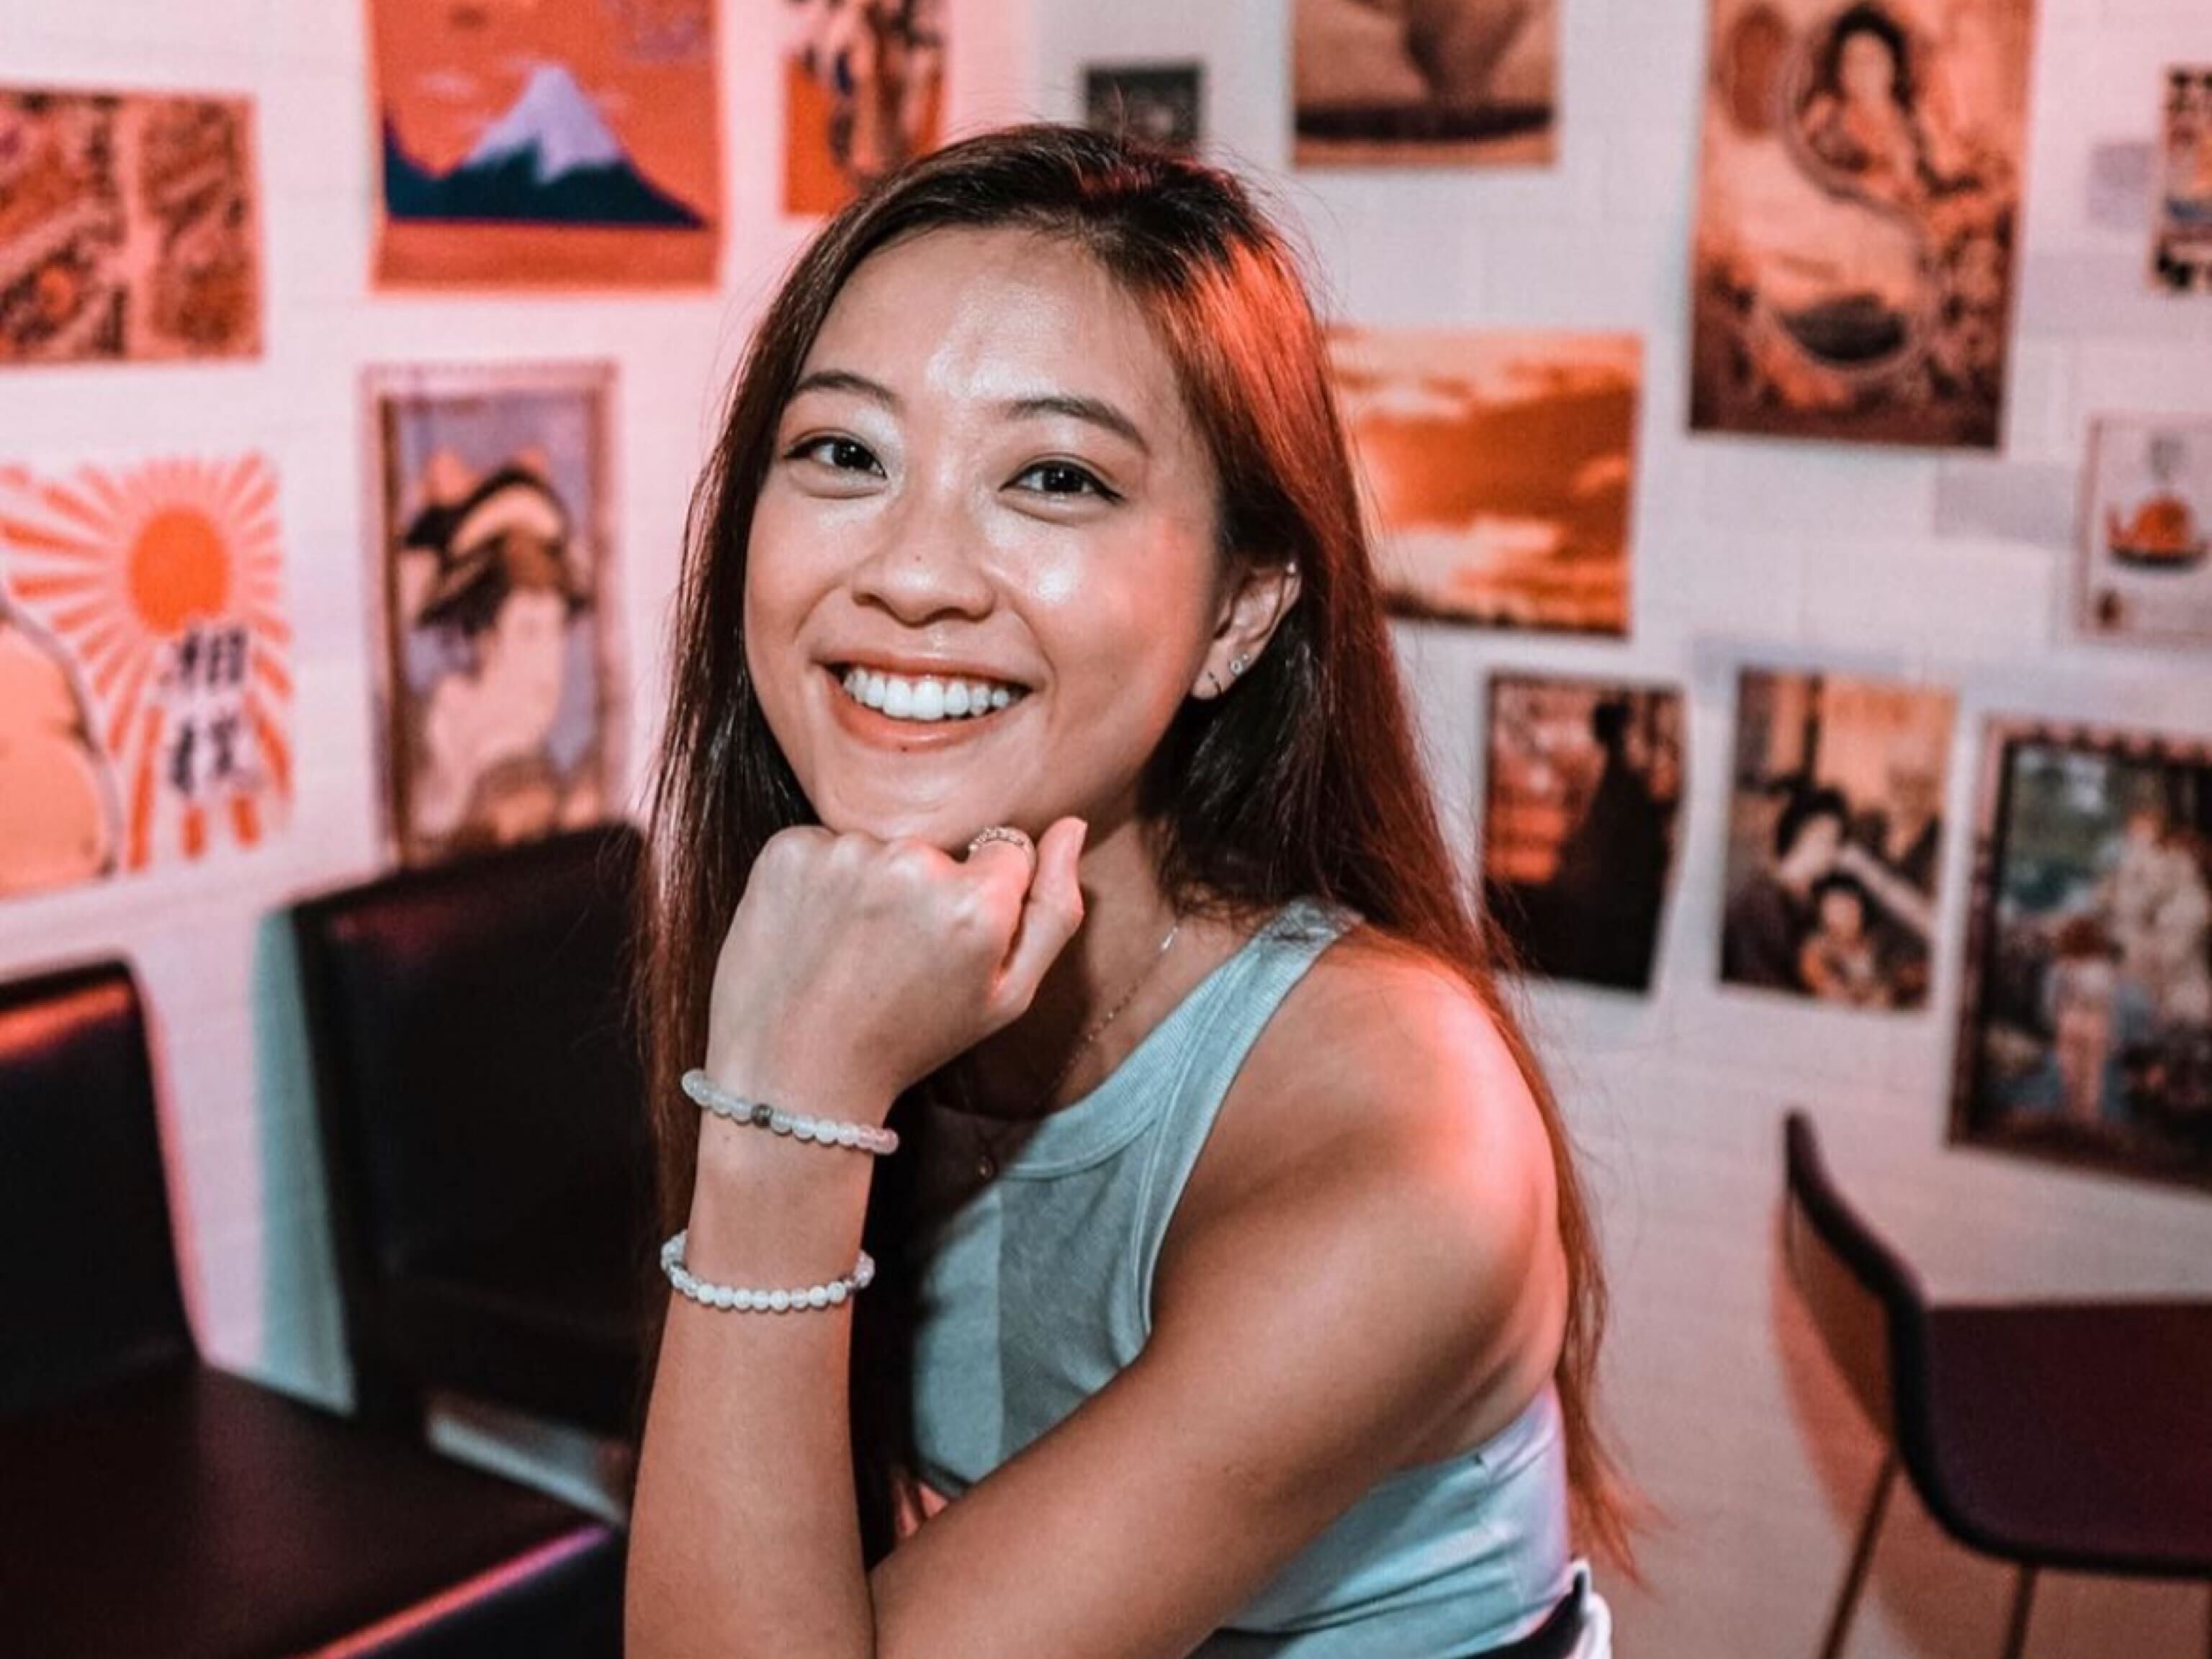 Social media influencer Rachel Wong (pictured) is accused by an Instagram user of infidelity. 